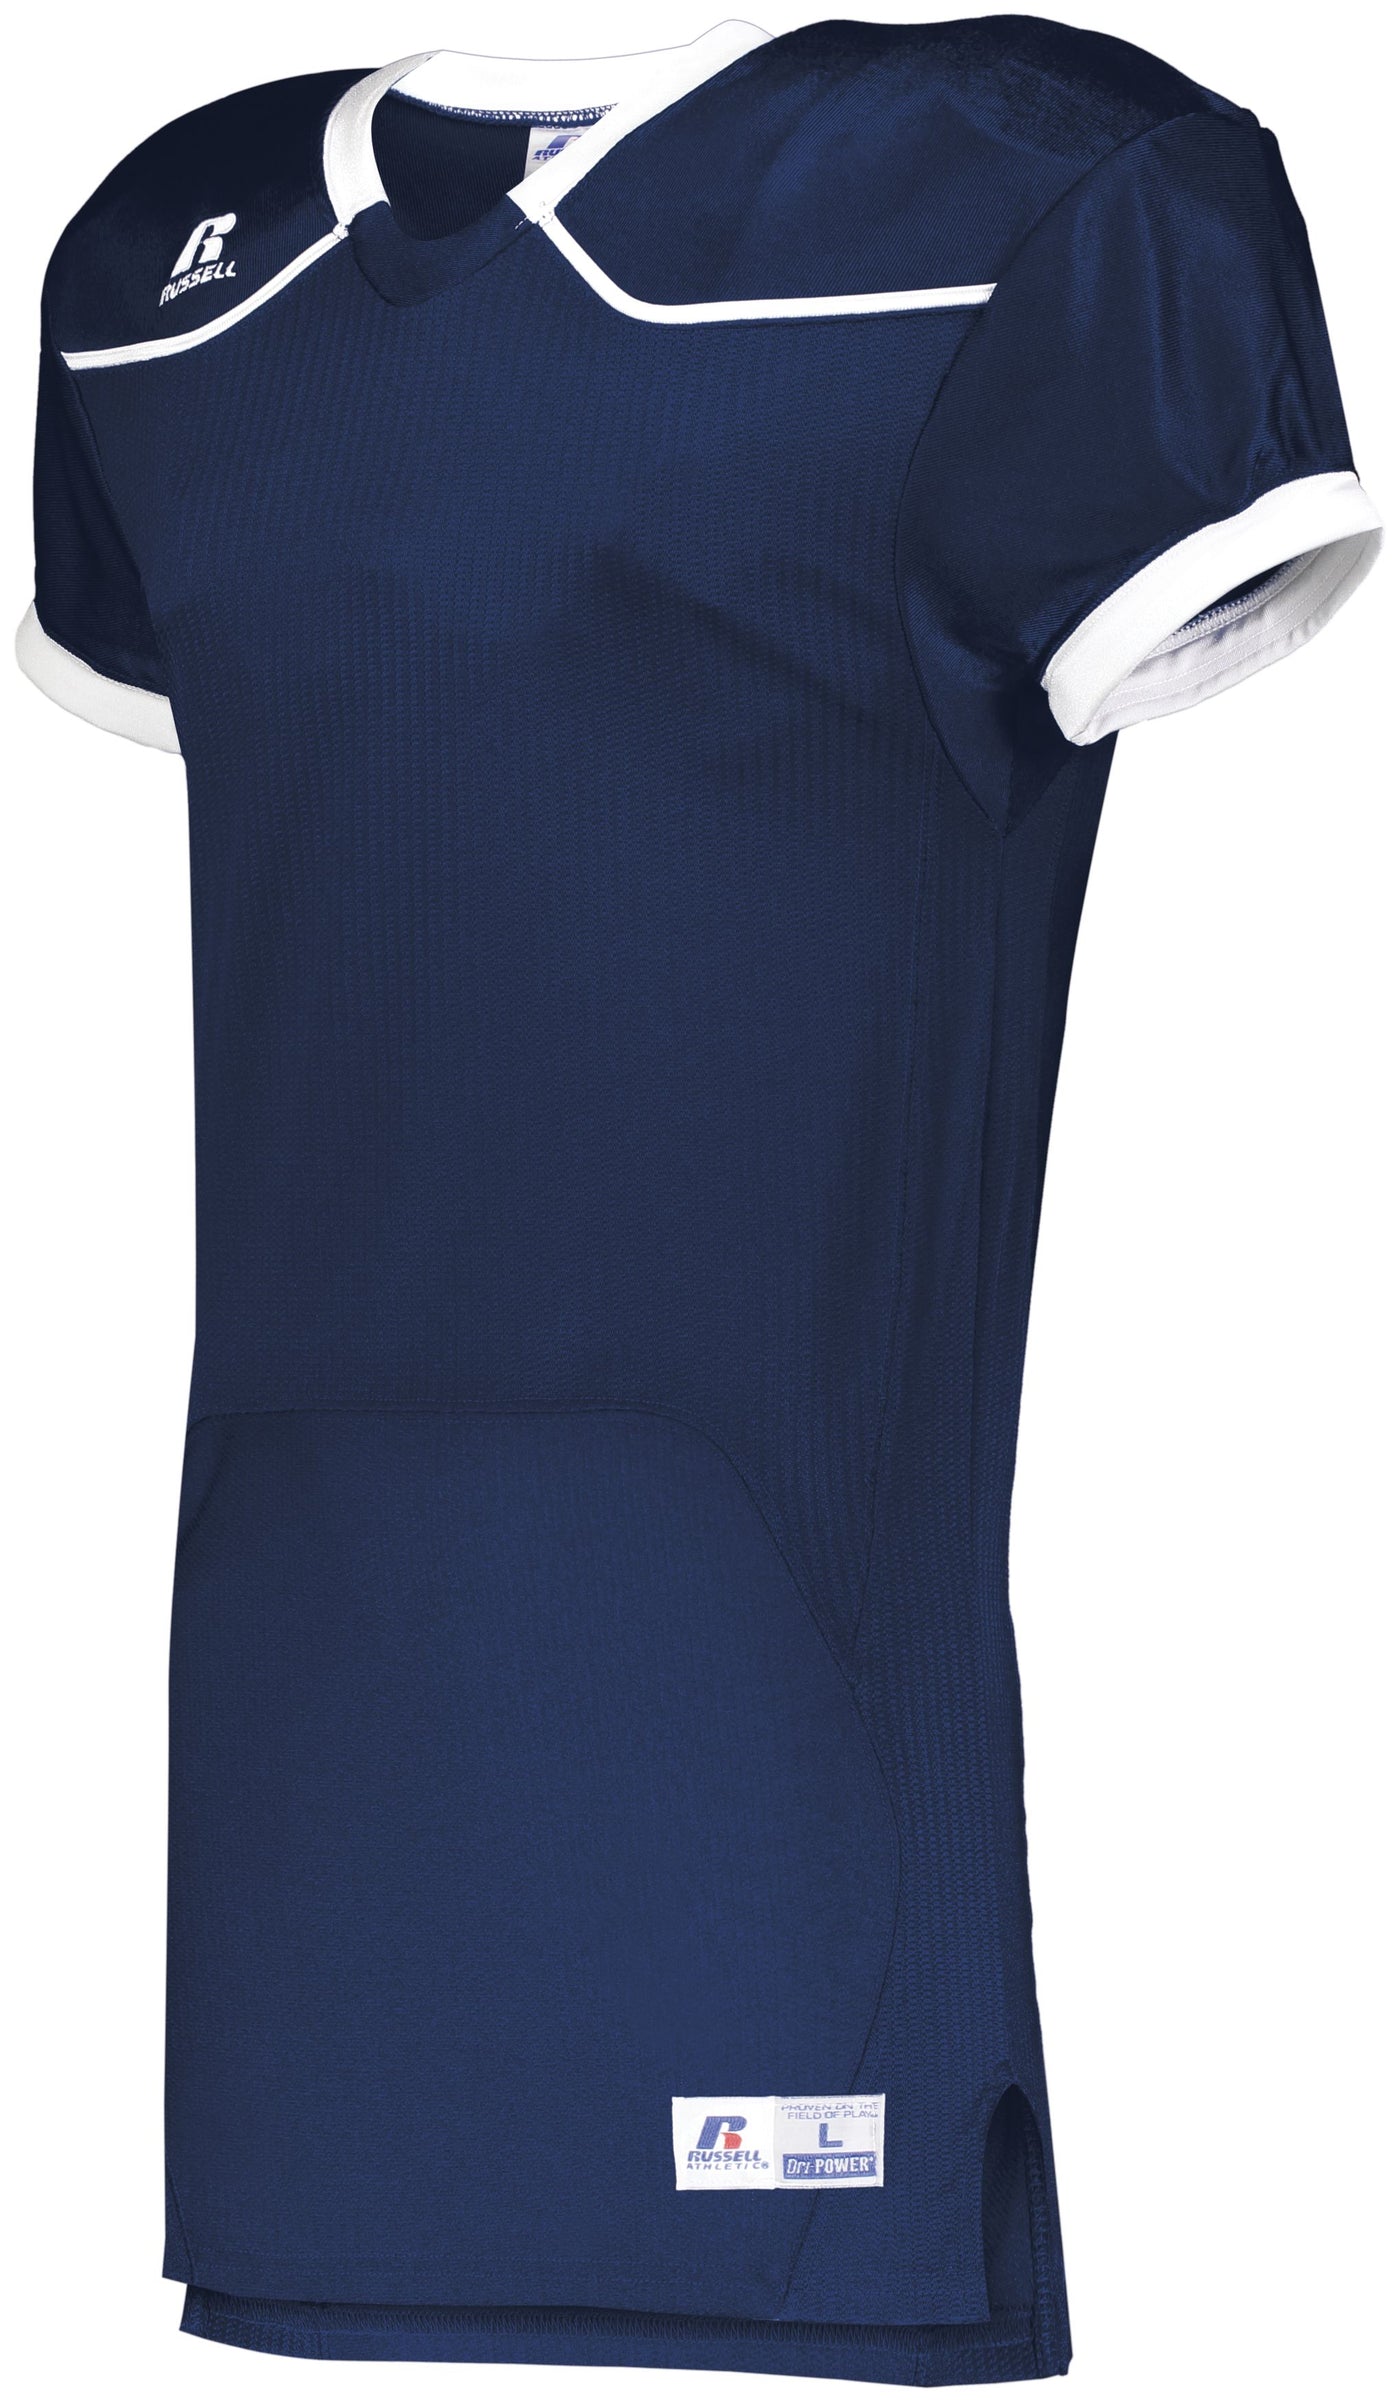 "RUSSELL TEAM COLOR BLOCK GAME JERSEY (HOME): UNLEASH YOUR TEAM'S DOMINANCE ON YOUR HOME TURF"